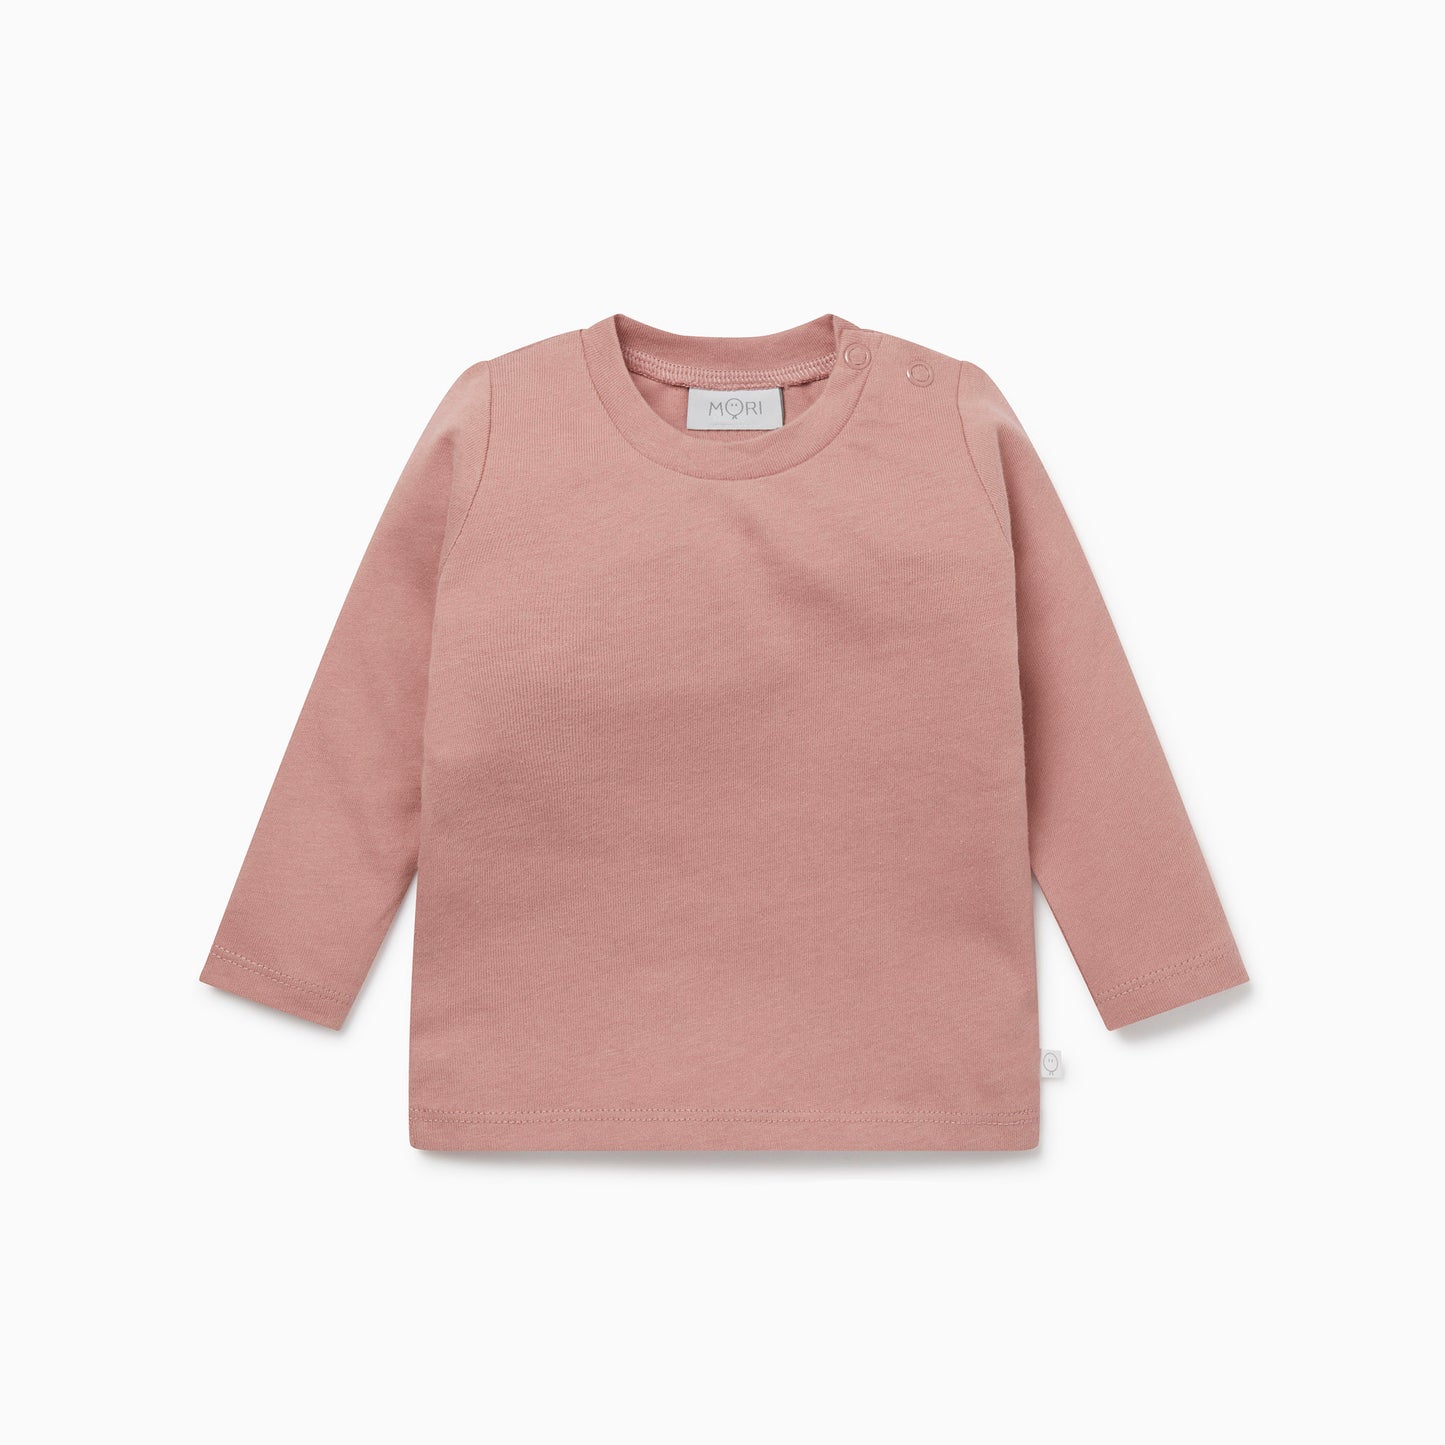 Long sleeve t-shirt in rose